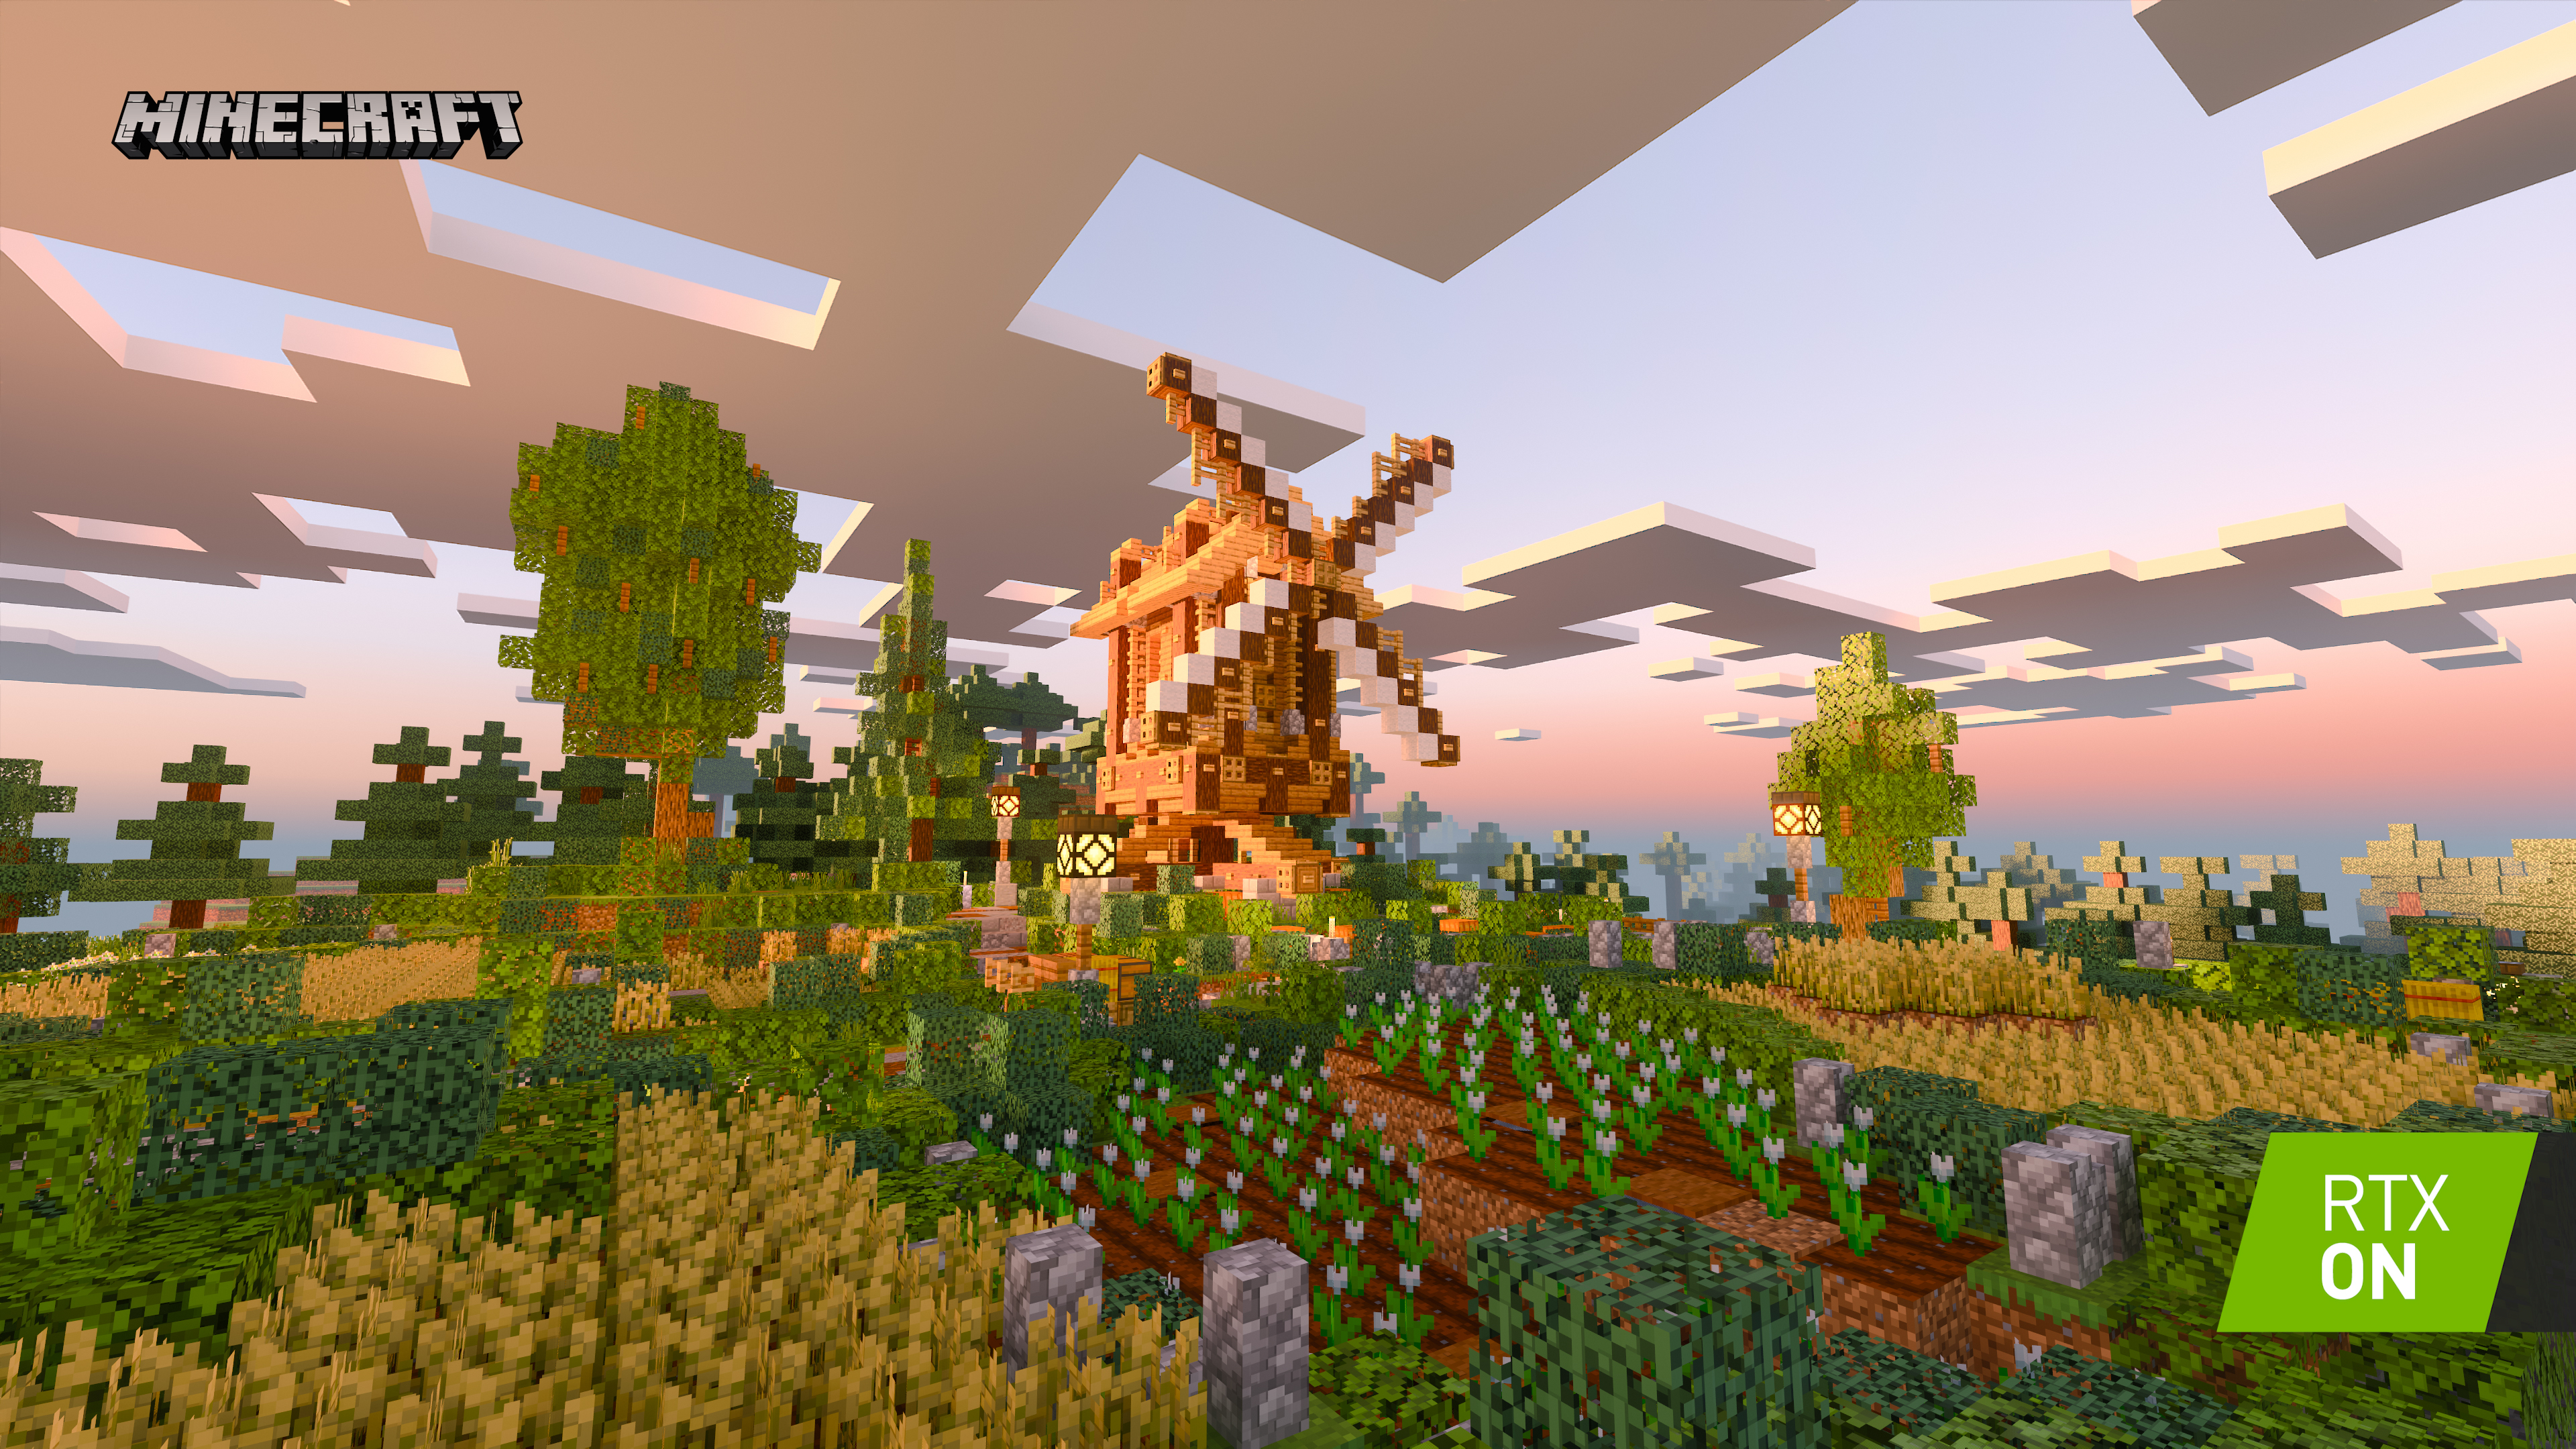 Nvidia releases 5 more free ray-traced Minecraft worlds